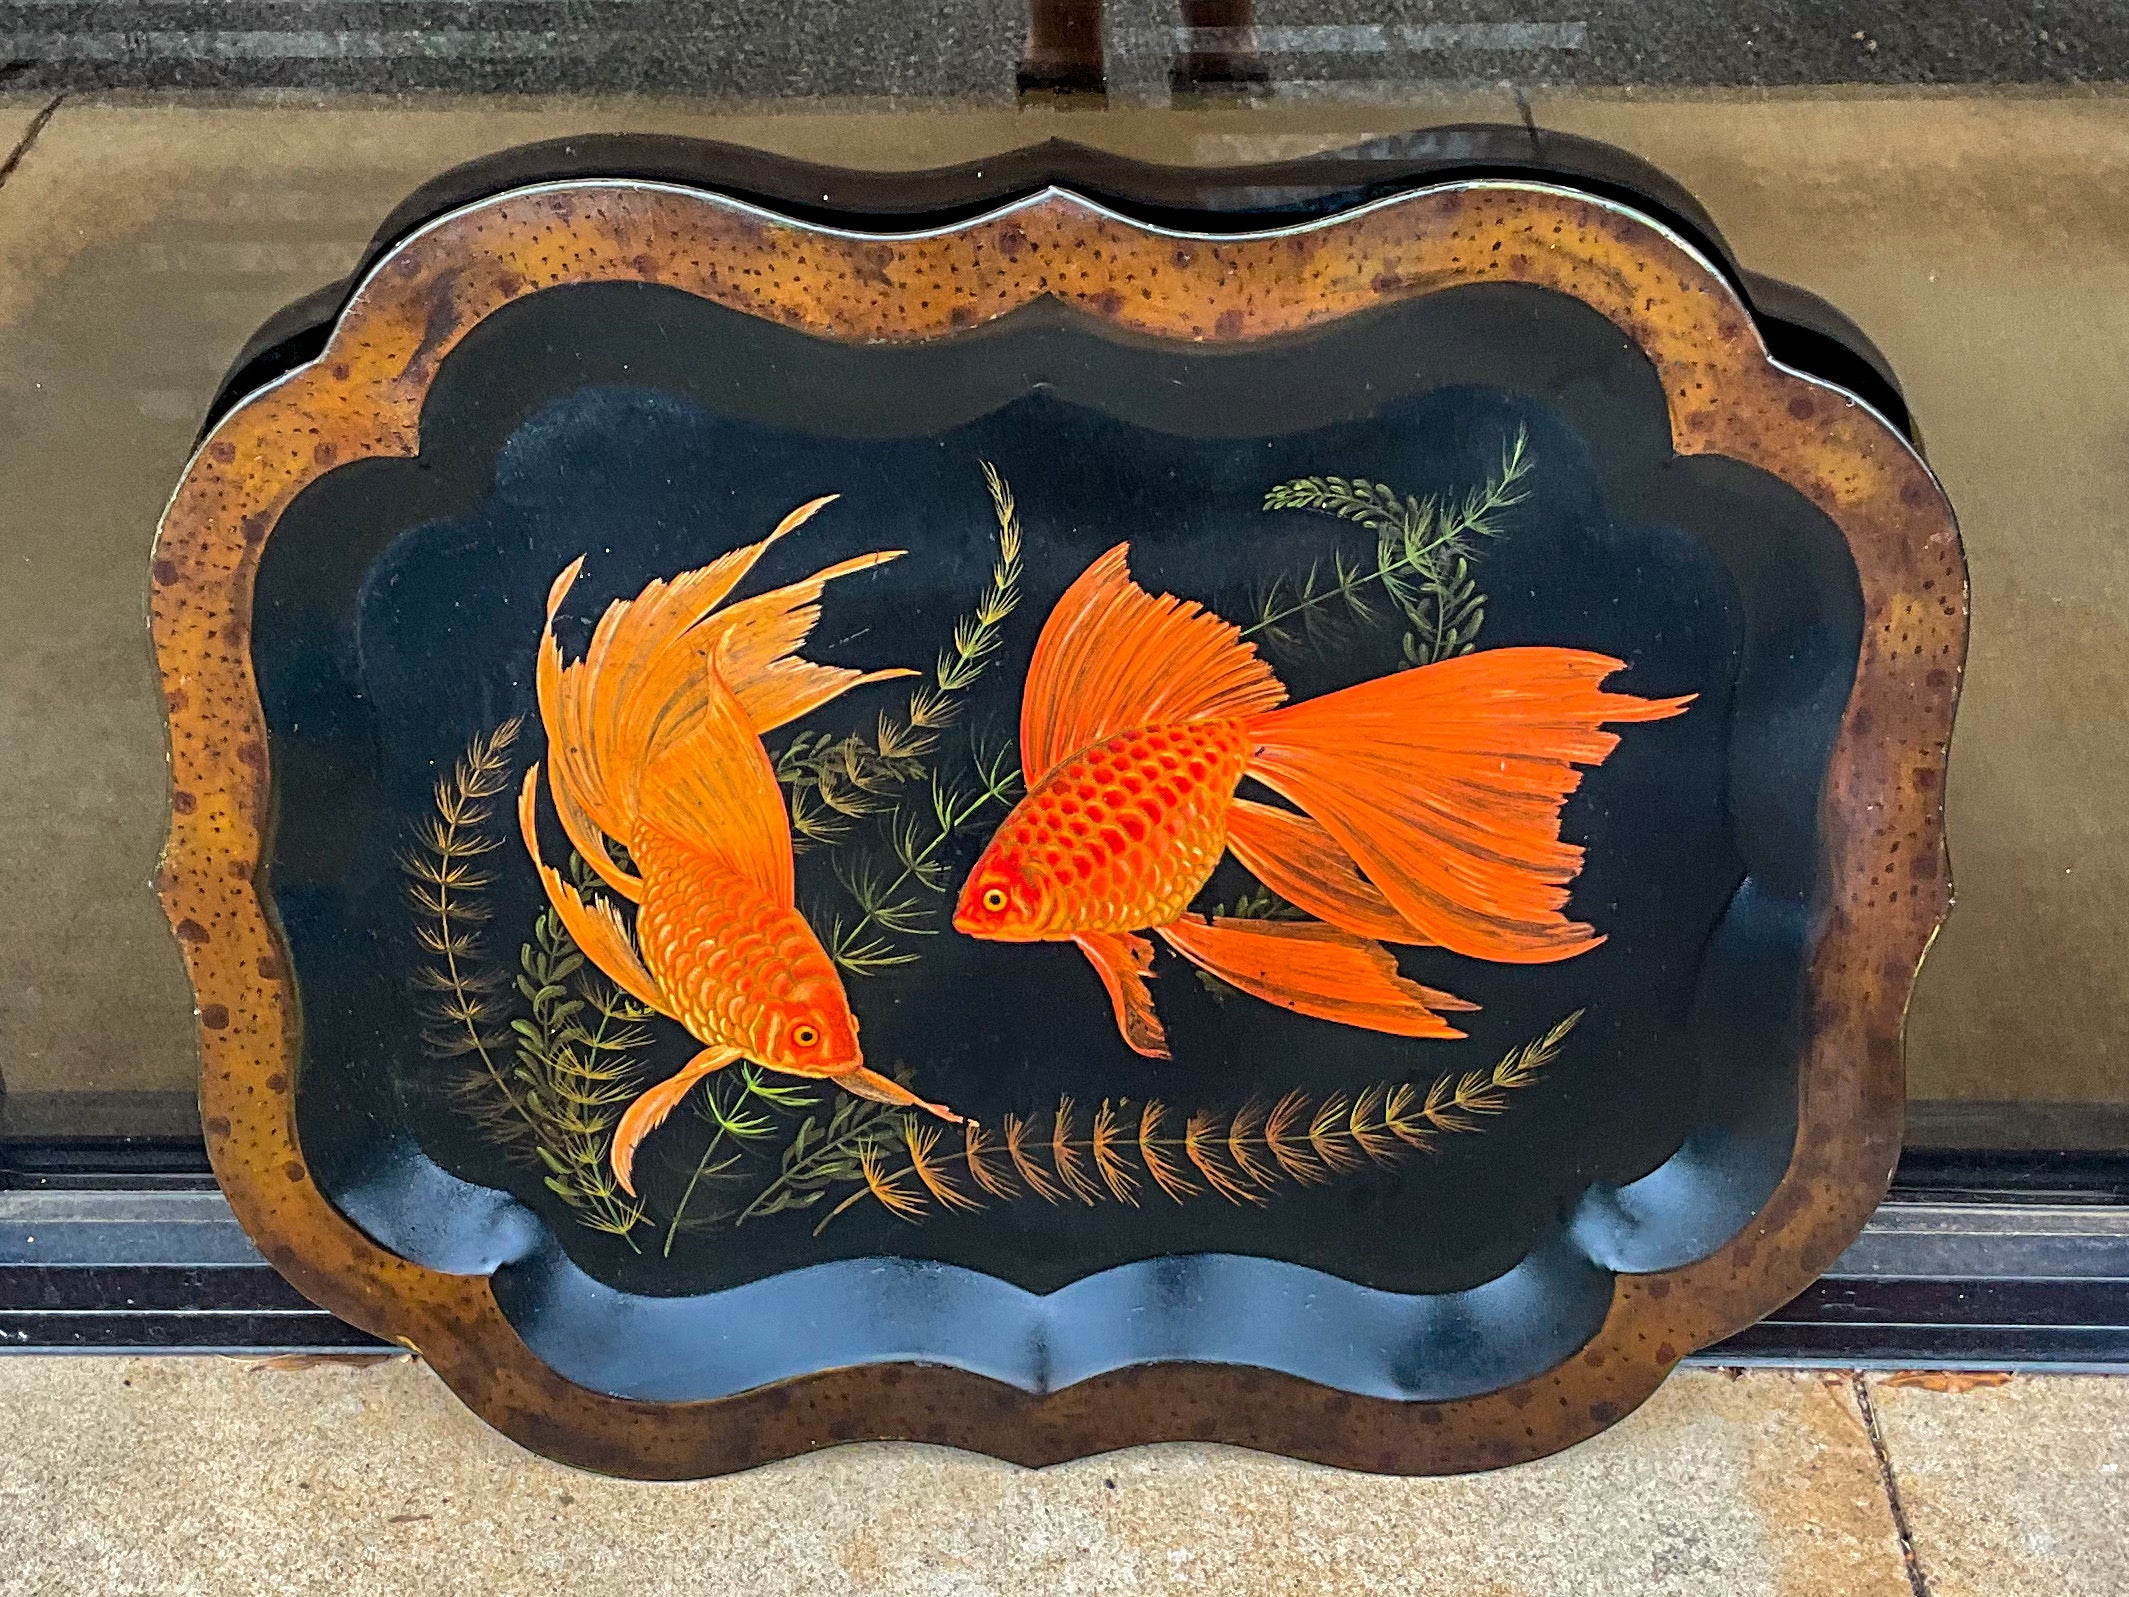 This is a lovely early English black toleware tray. I believe the faux tortoise paint along the rim along with the two carp and sealift are vintage additions. The tray does show same age appropriate wear that does not detract from it’s beauty.